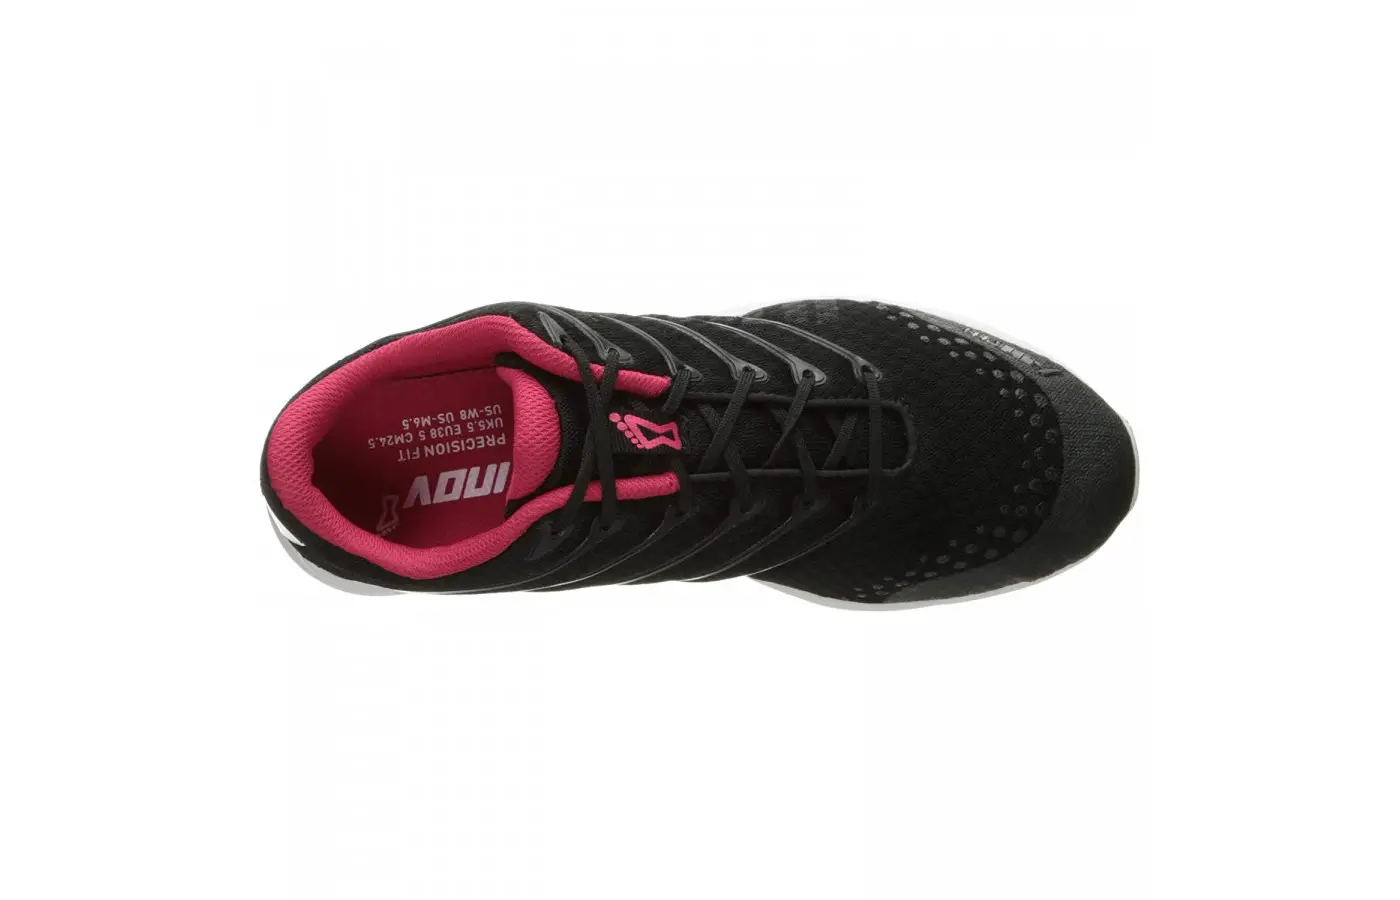 The Inov8 F Lite 195 offer a closer, more contoured fit in order to amplify long-distance runs.